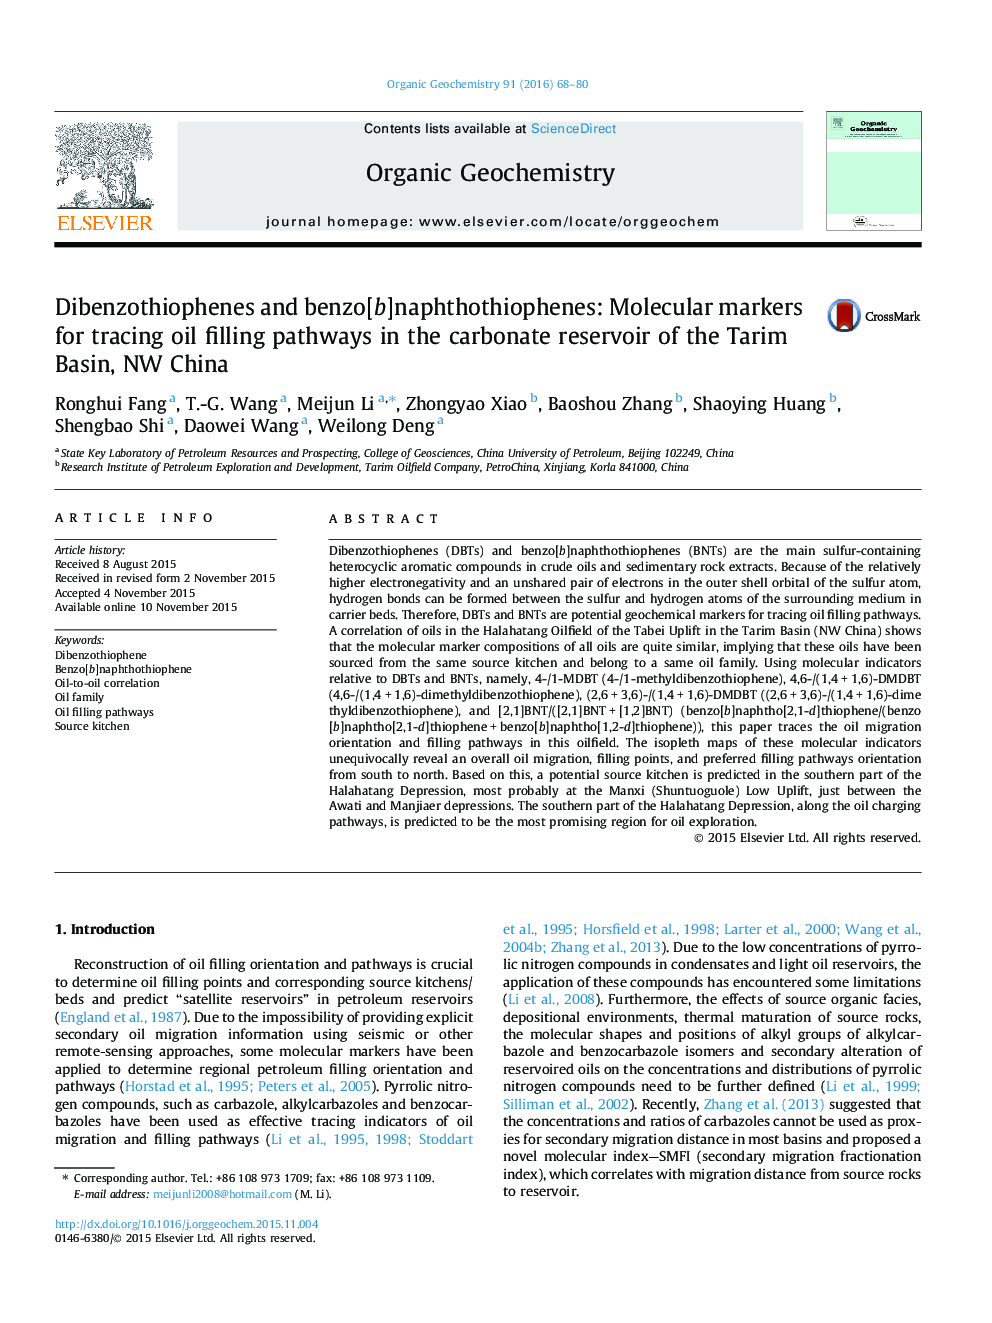 Dibenzothiophenes and benzo[b]naphthothiophenes: Molecular markers for tracing oil filling pathways in the carbonate reservoir of the Tarim Basin, NW China